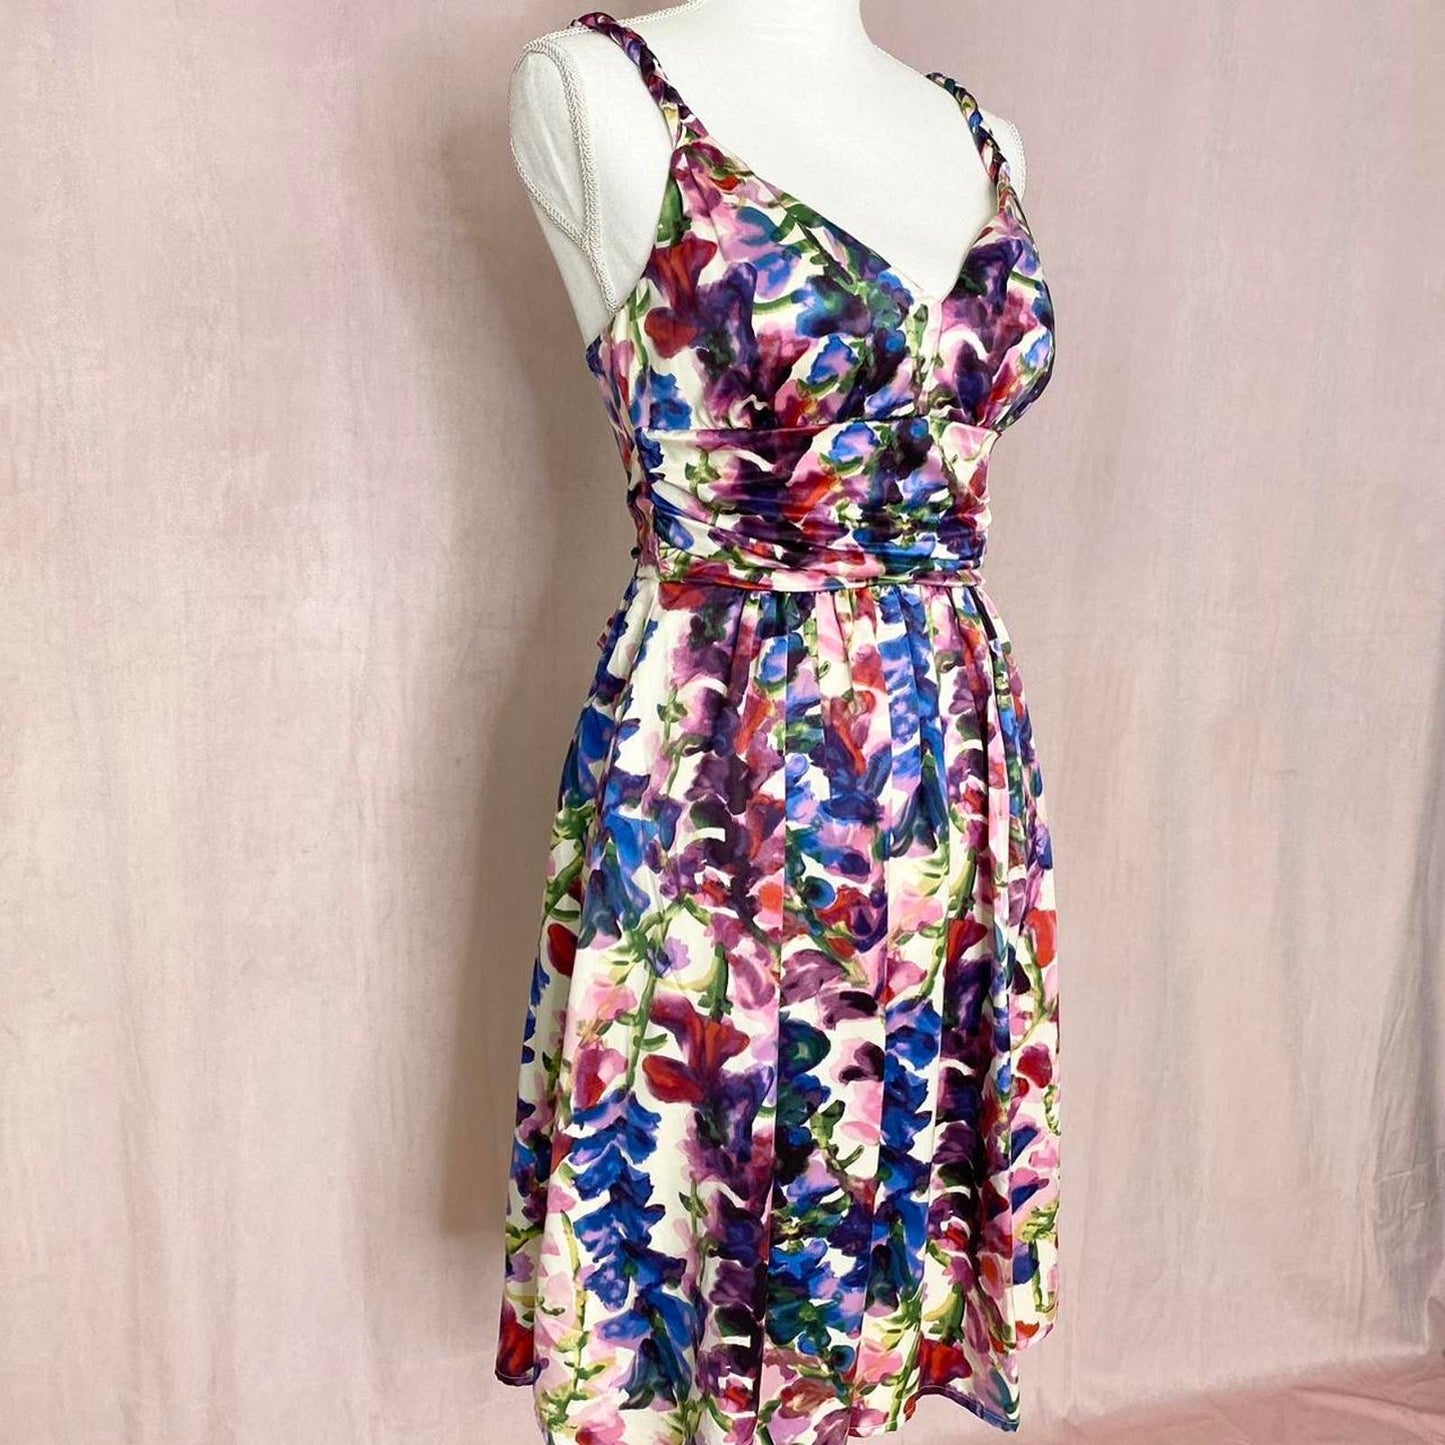 Preowned Nordstrom Ruby Rox Floral Fit & Flare Dress, Size 3